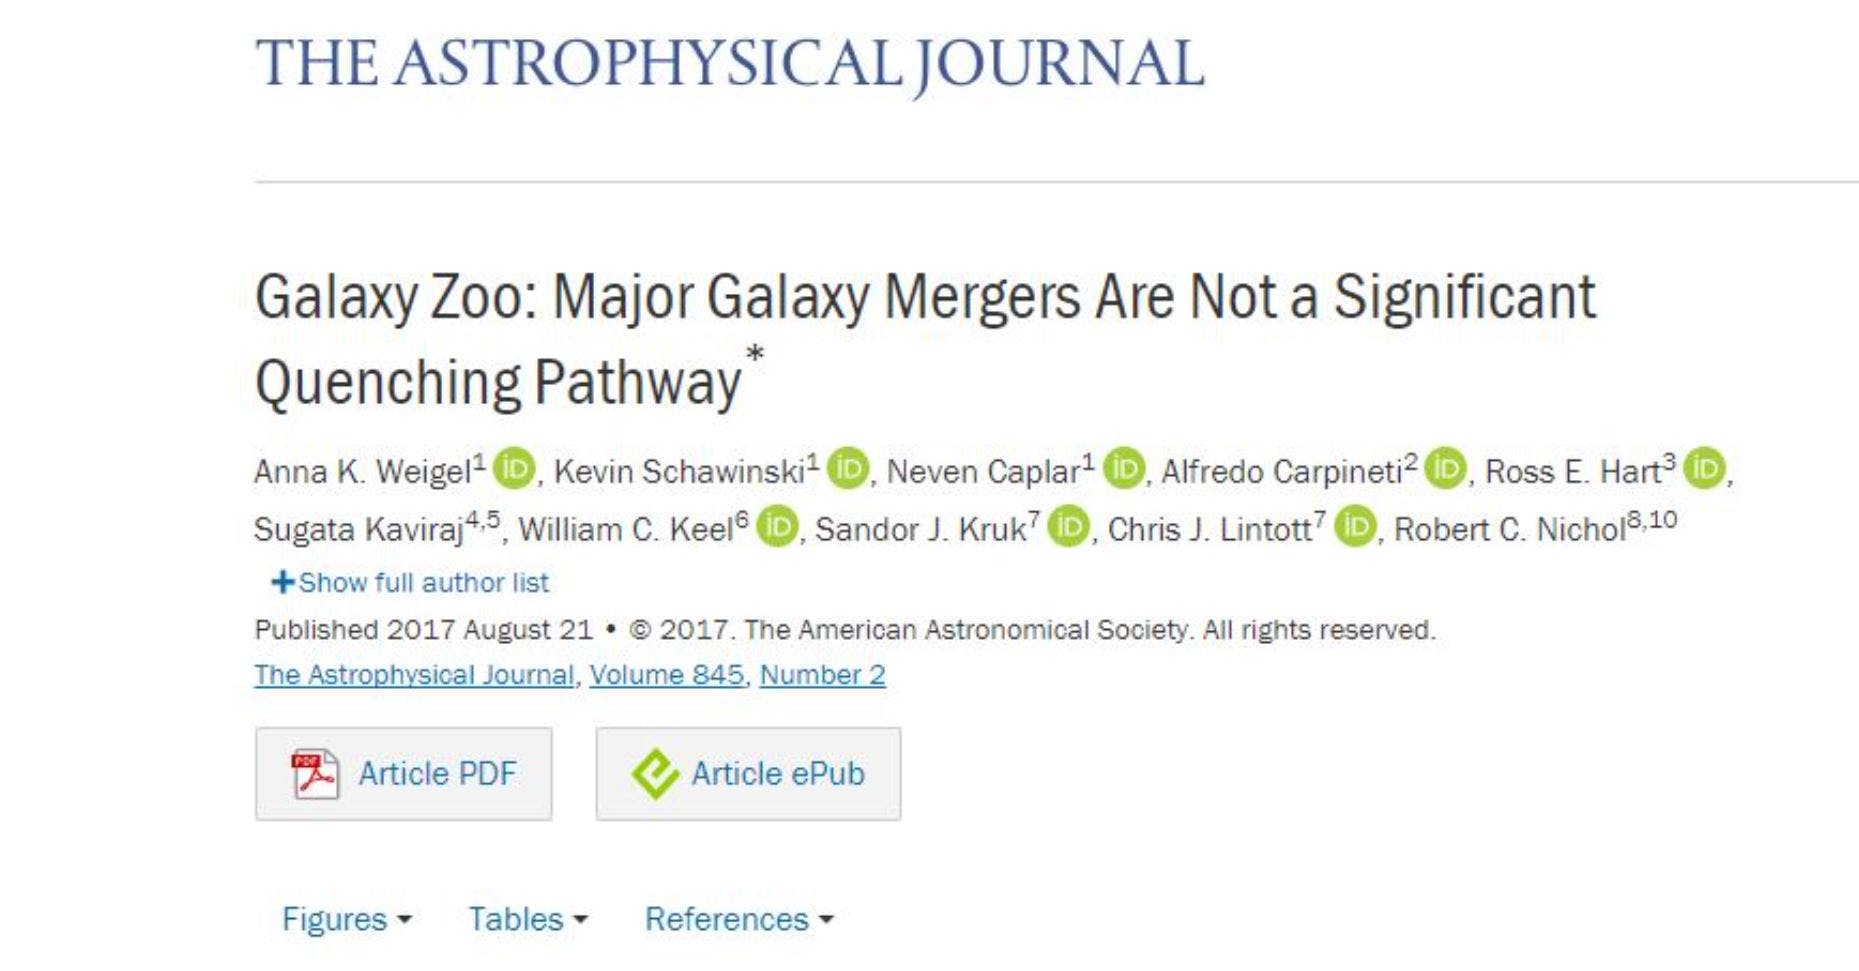 Galaxy Zoo: Major Galaxy Mergers Are Not a Significant Quenching Pathway